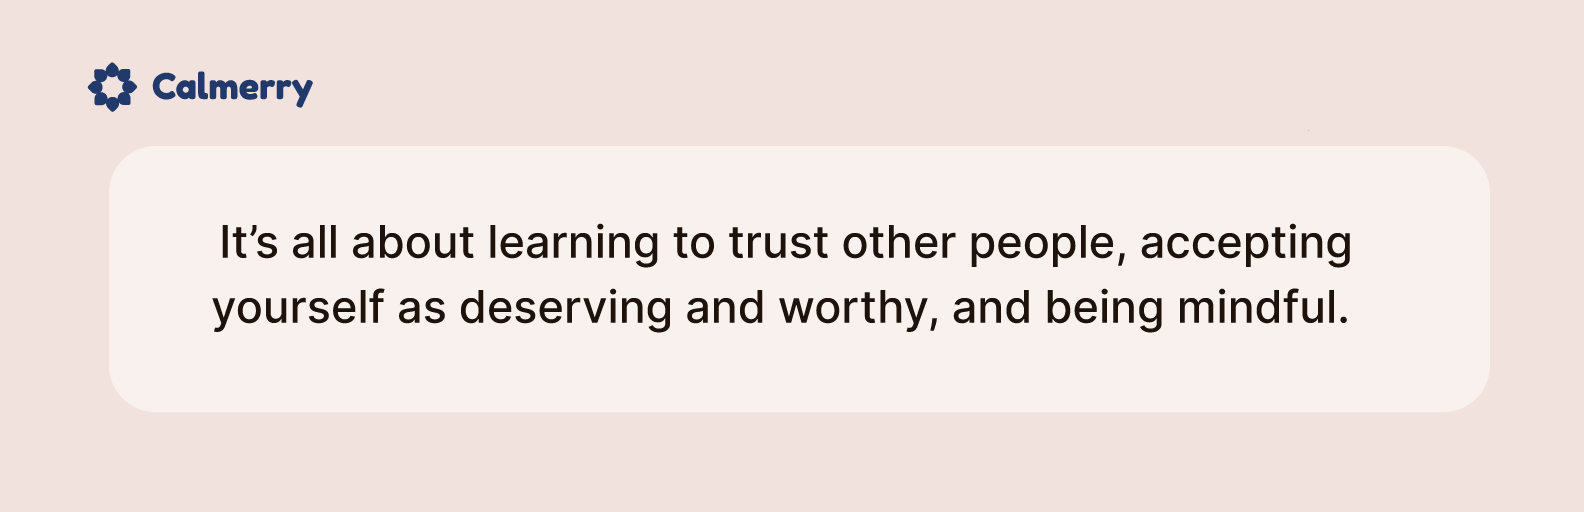 It’s all about learning to trust other people